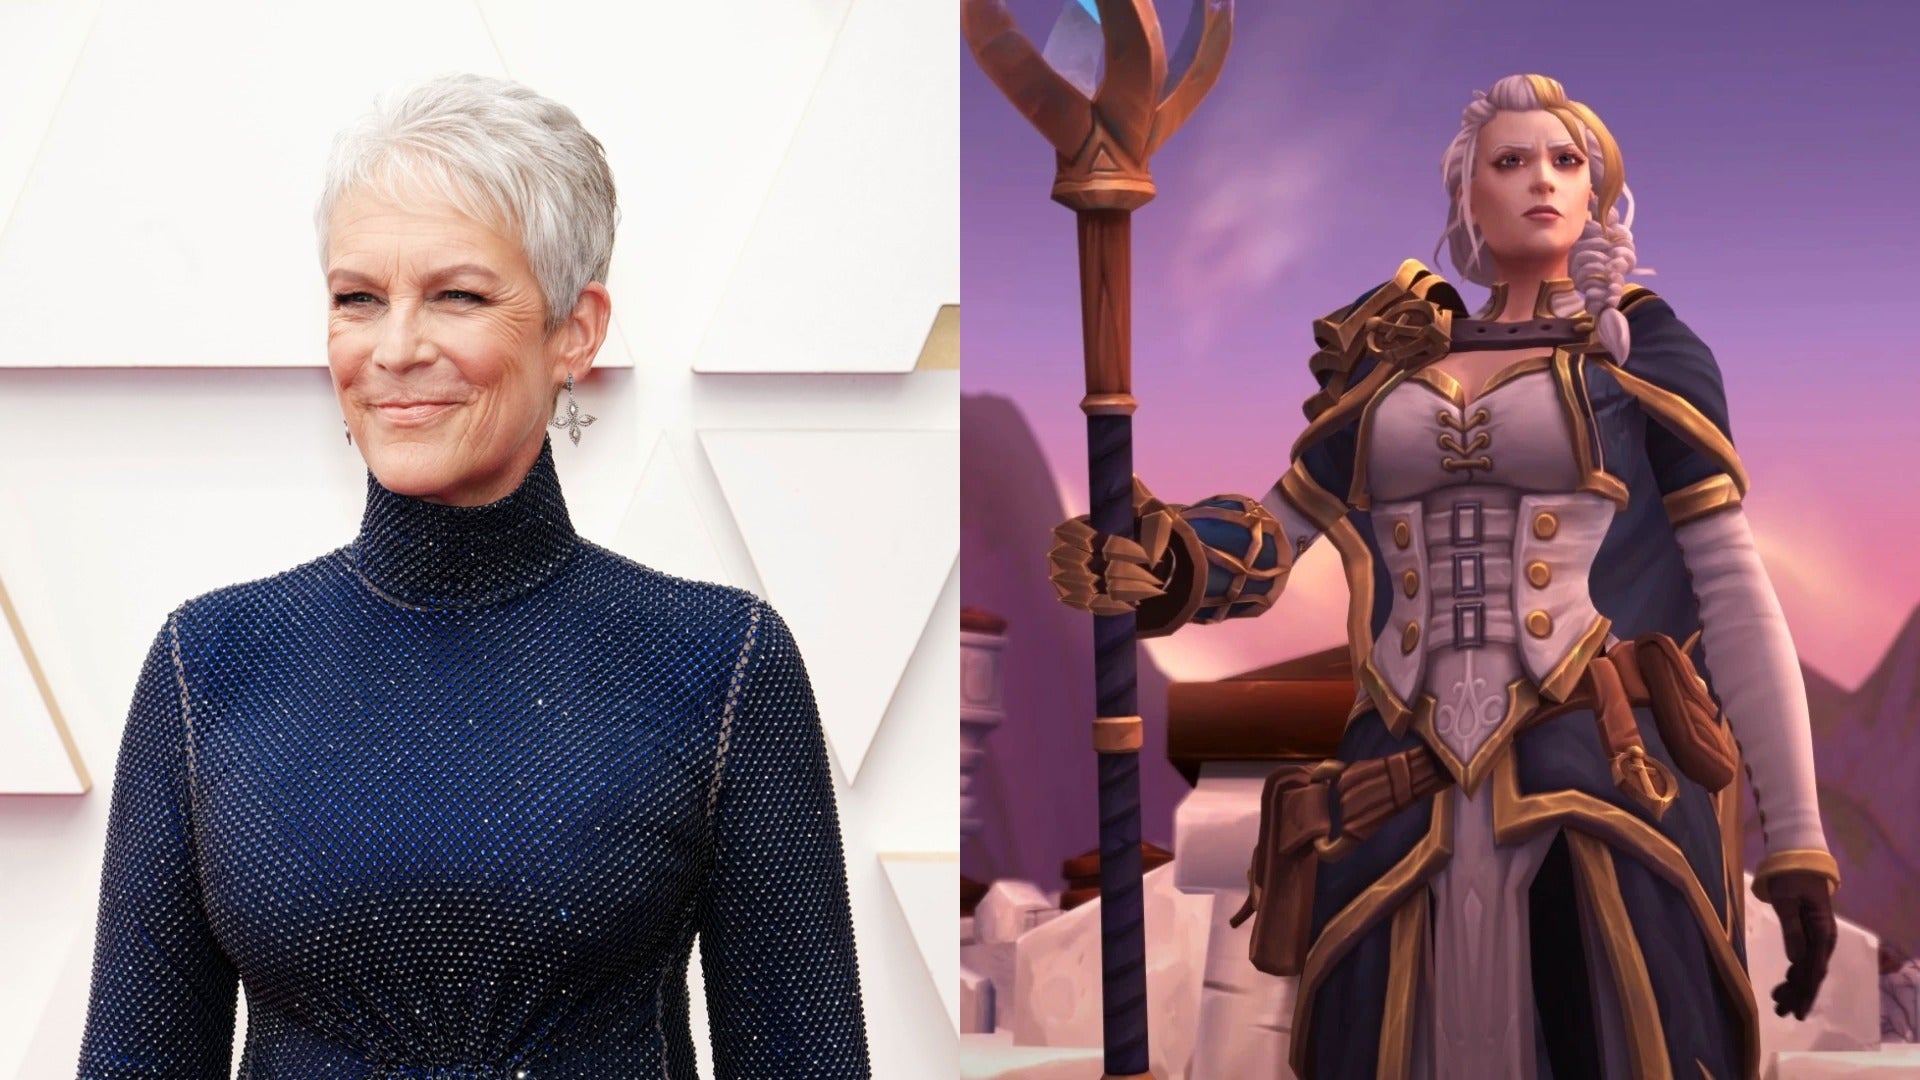 Jamie Lee Curtis at the Oscars 2022 (left) and Jaina Proudmore from World of Warcraft (right)